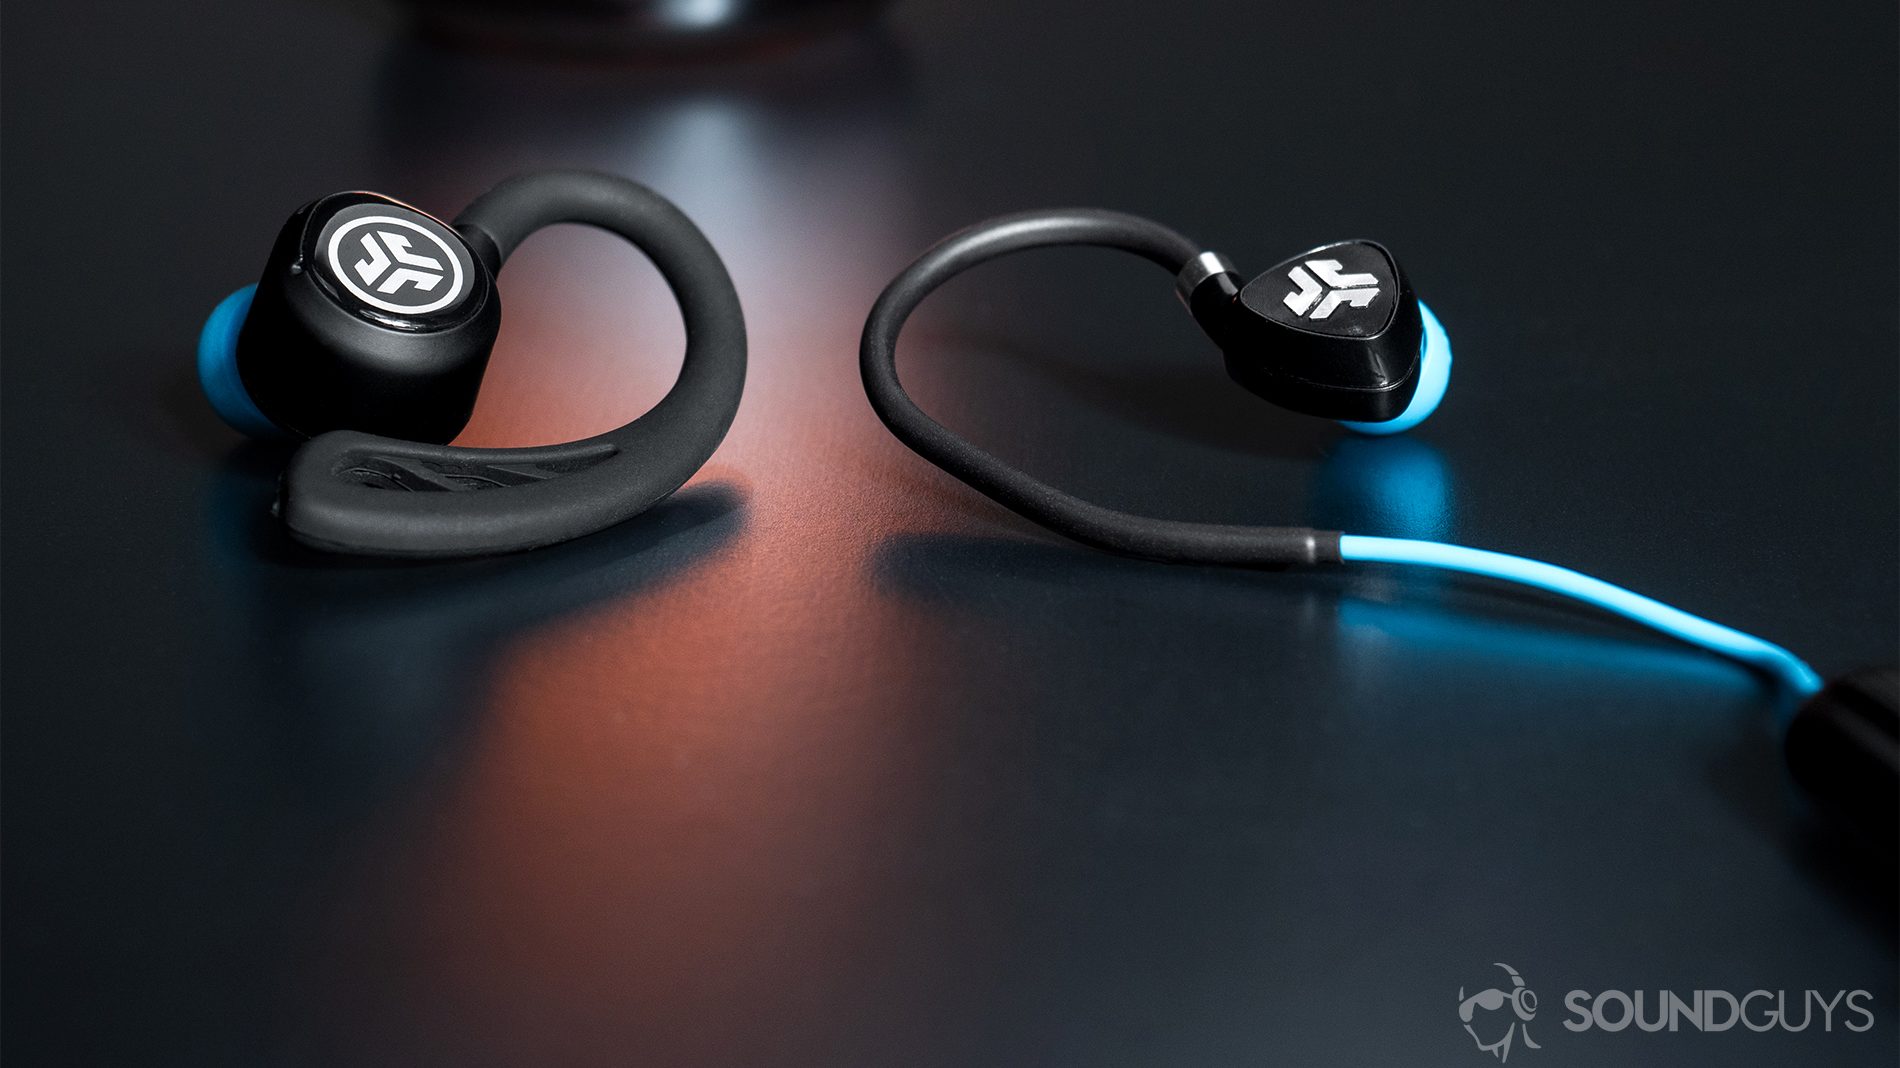 JLab Fit Sport Wireless: The JLab Epic Air Elite true wireless earbud next to the Fit Sport for a size comparison.